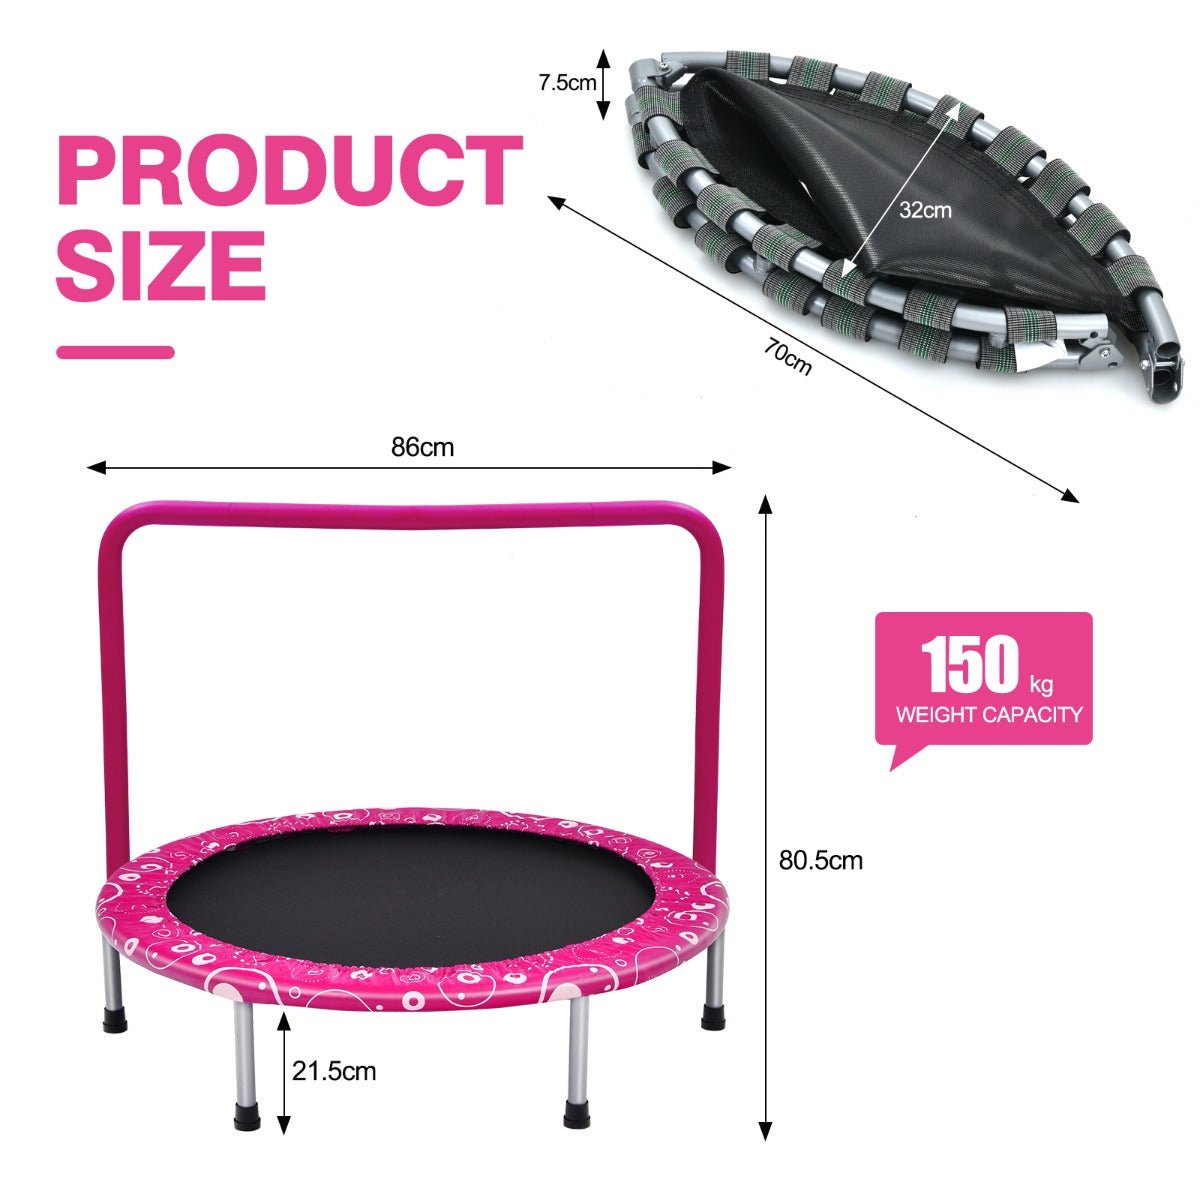 Boundless Fun: Foldable Kids Trampoline with Handle for Indoor & Outdoor Pink